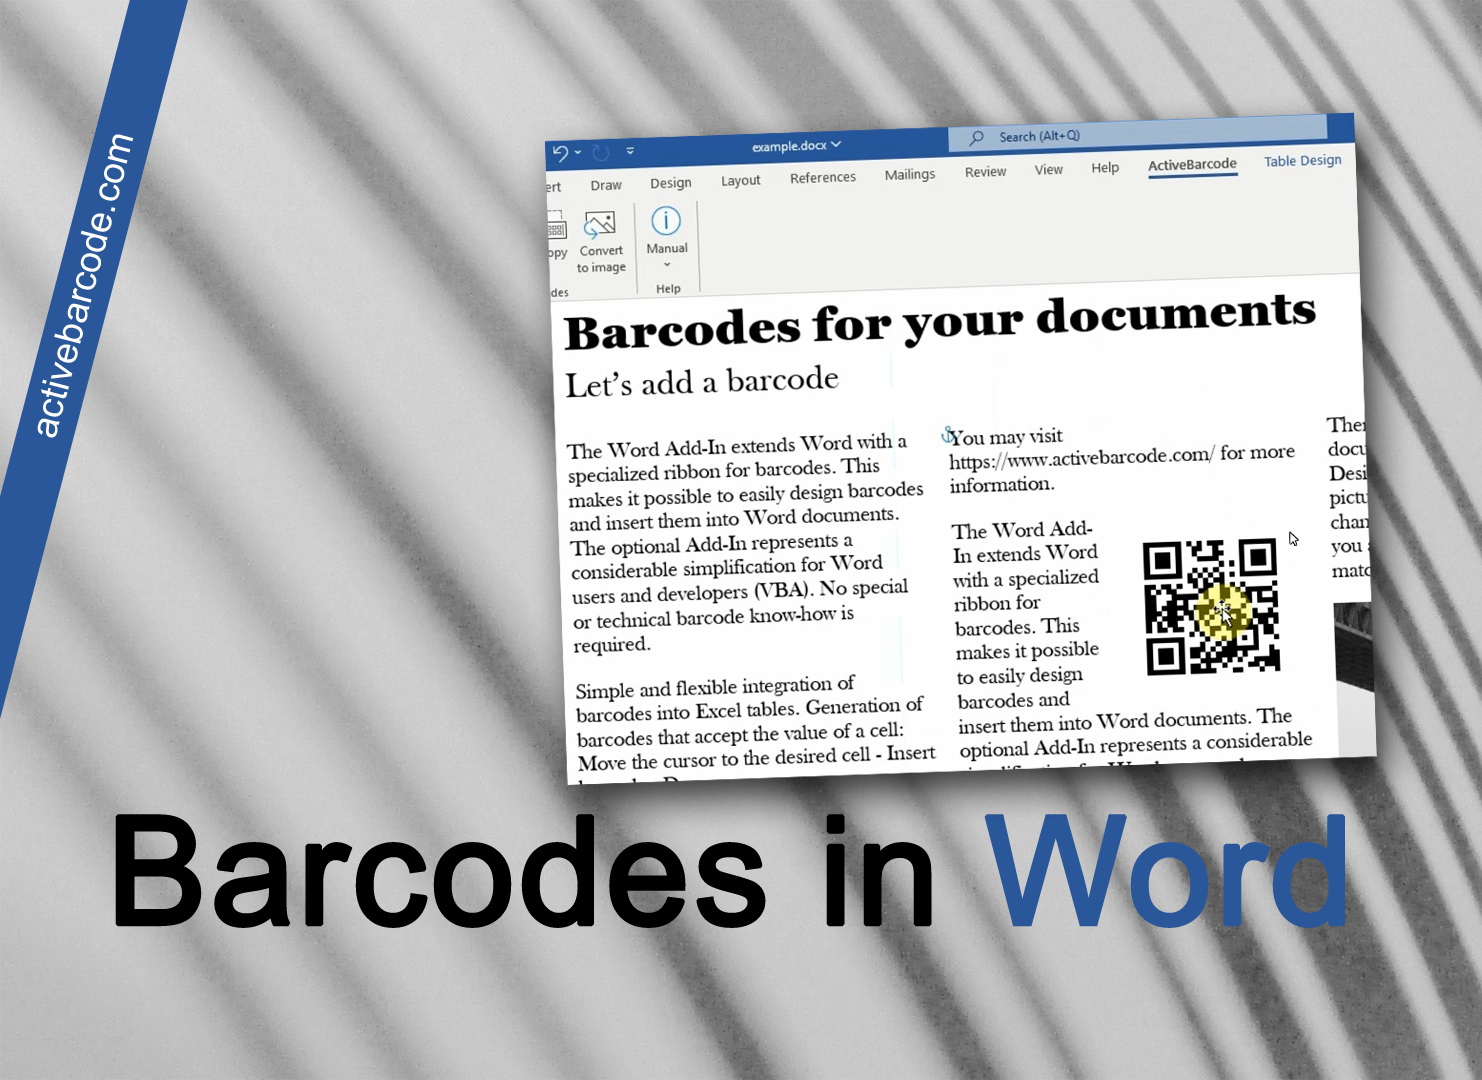 ActiveBarcode: How to embed a barcode into a Word document.